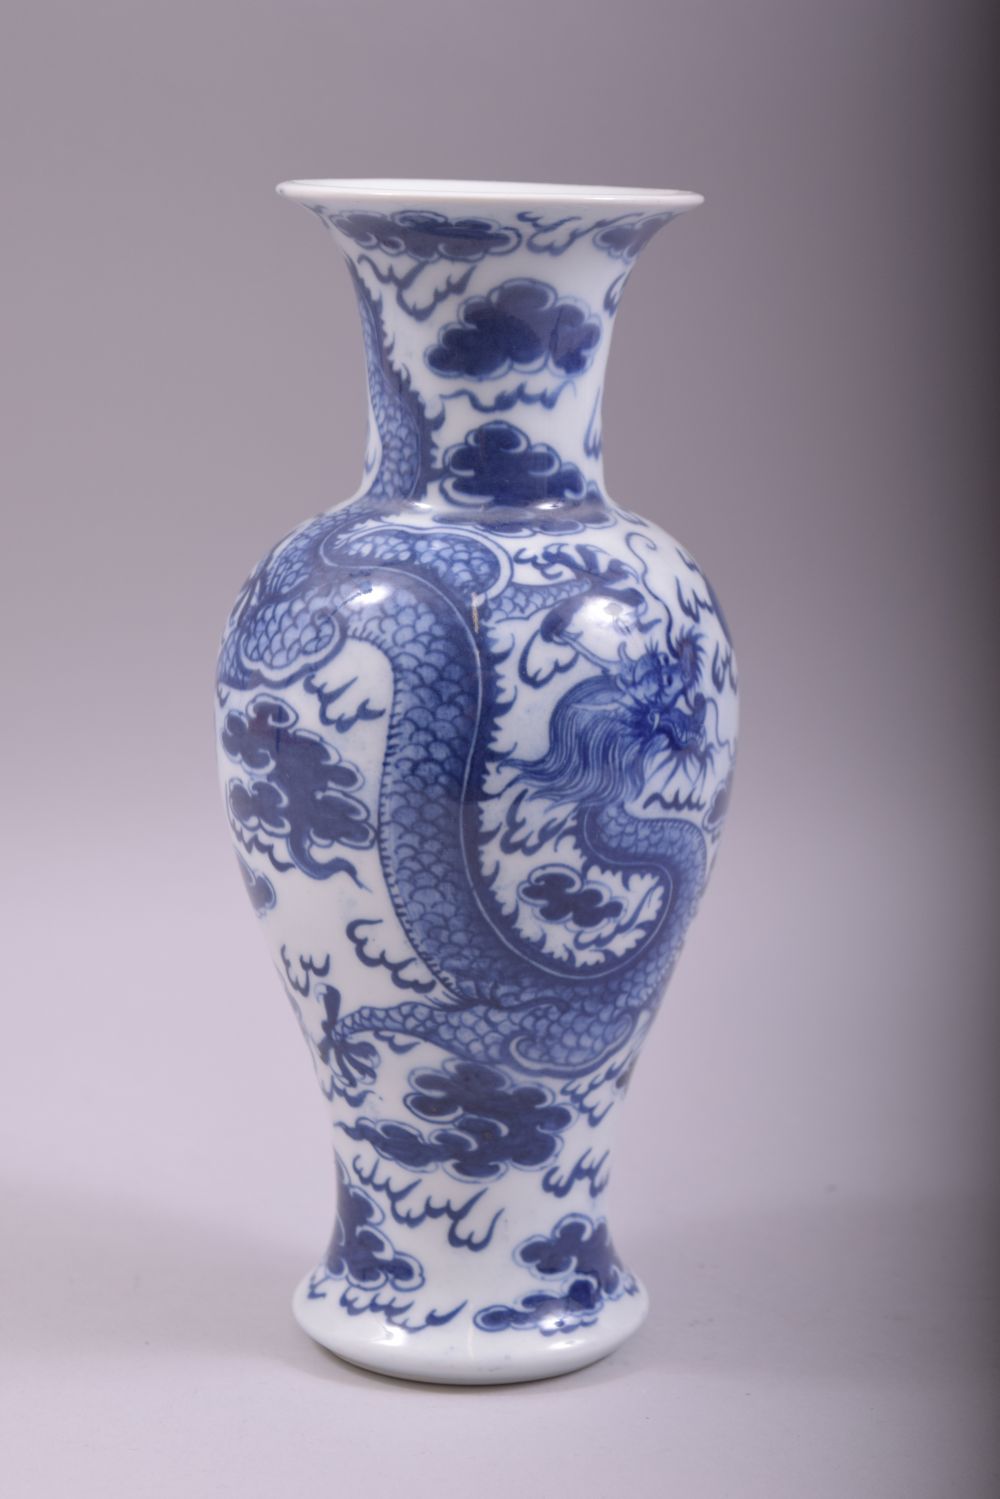 A CHINESE BLUE AND WHITE PORCELAIN DRAGON VASE, 23.5cm high. - Image 2 of 6